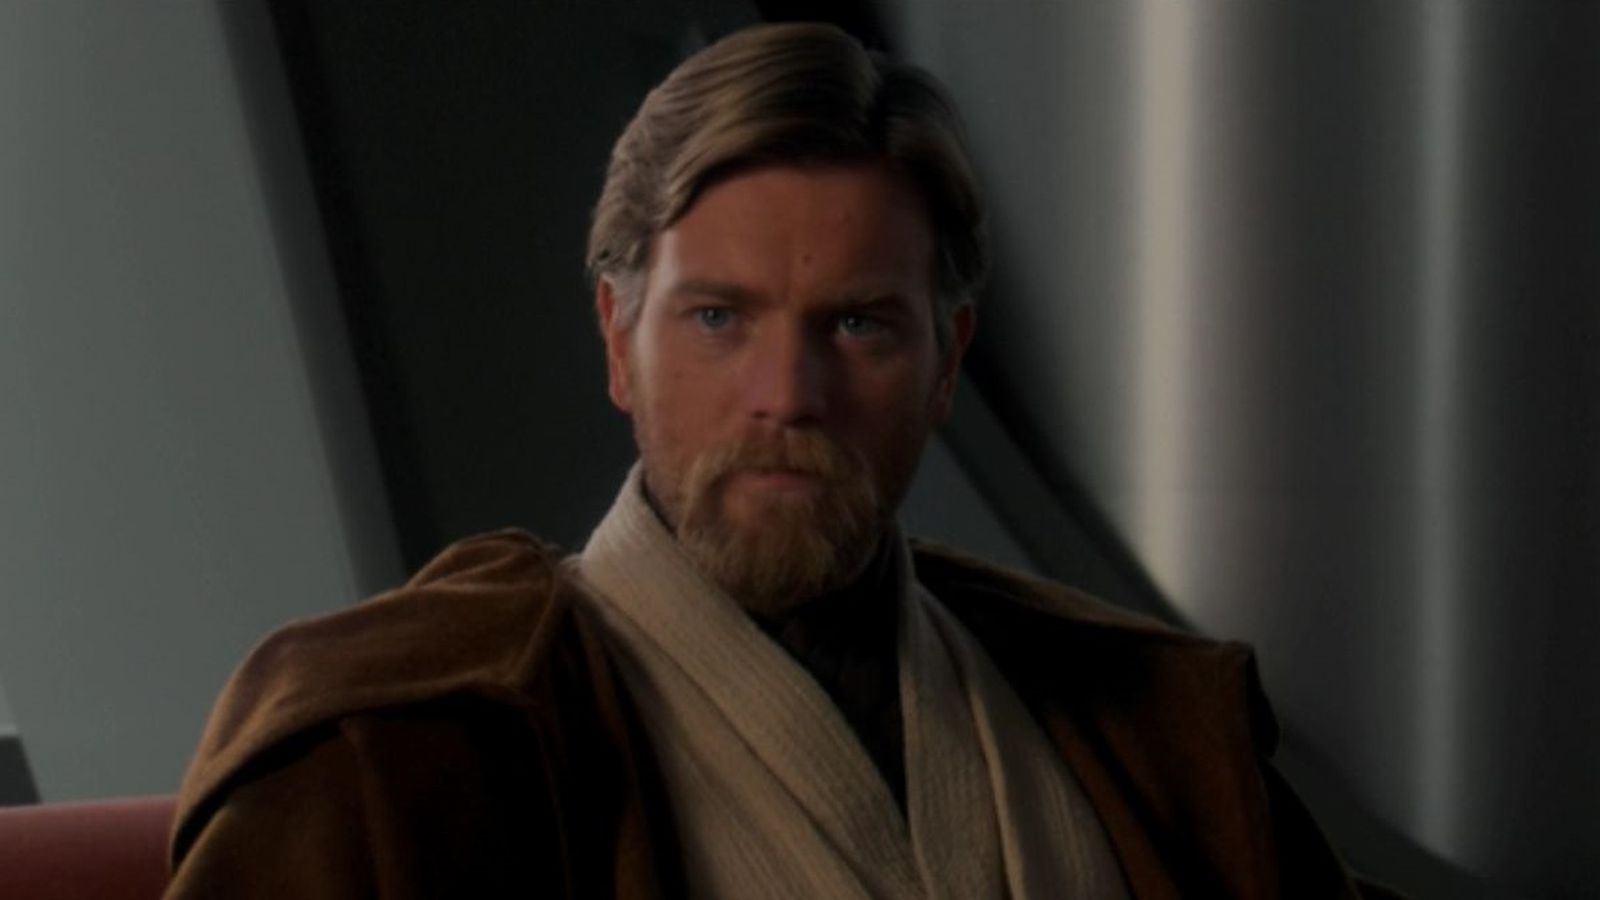 What Would An Obi Wan Kenobi Film Mean For The Future Of The Star Wars Franchise?